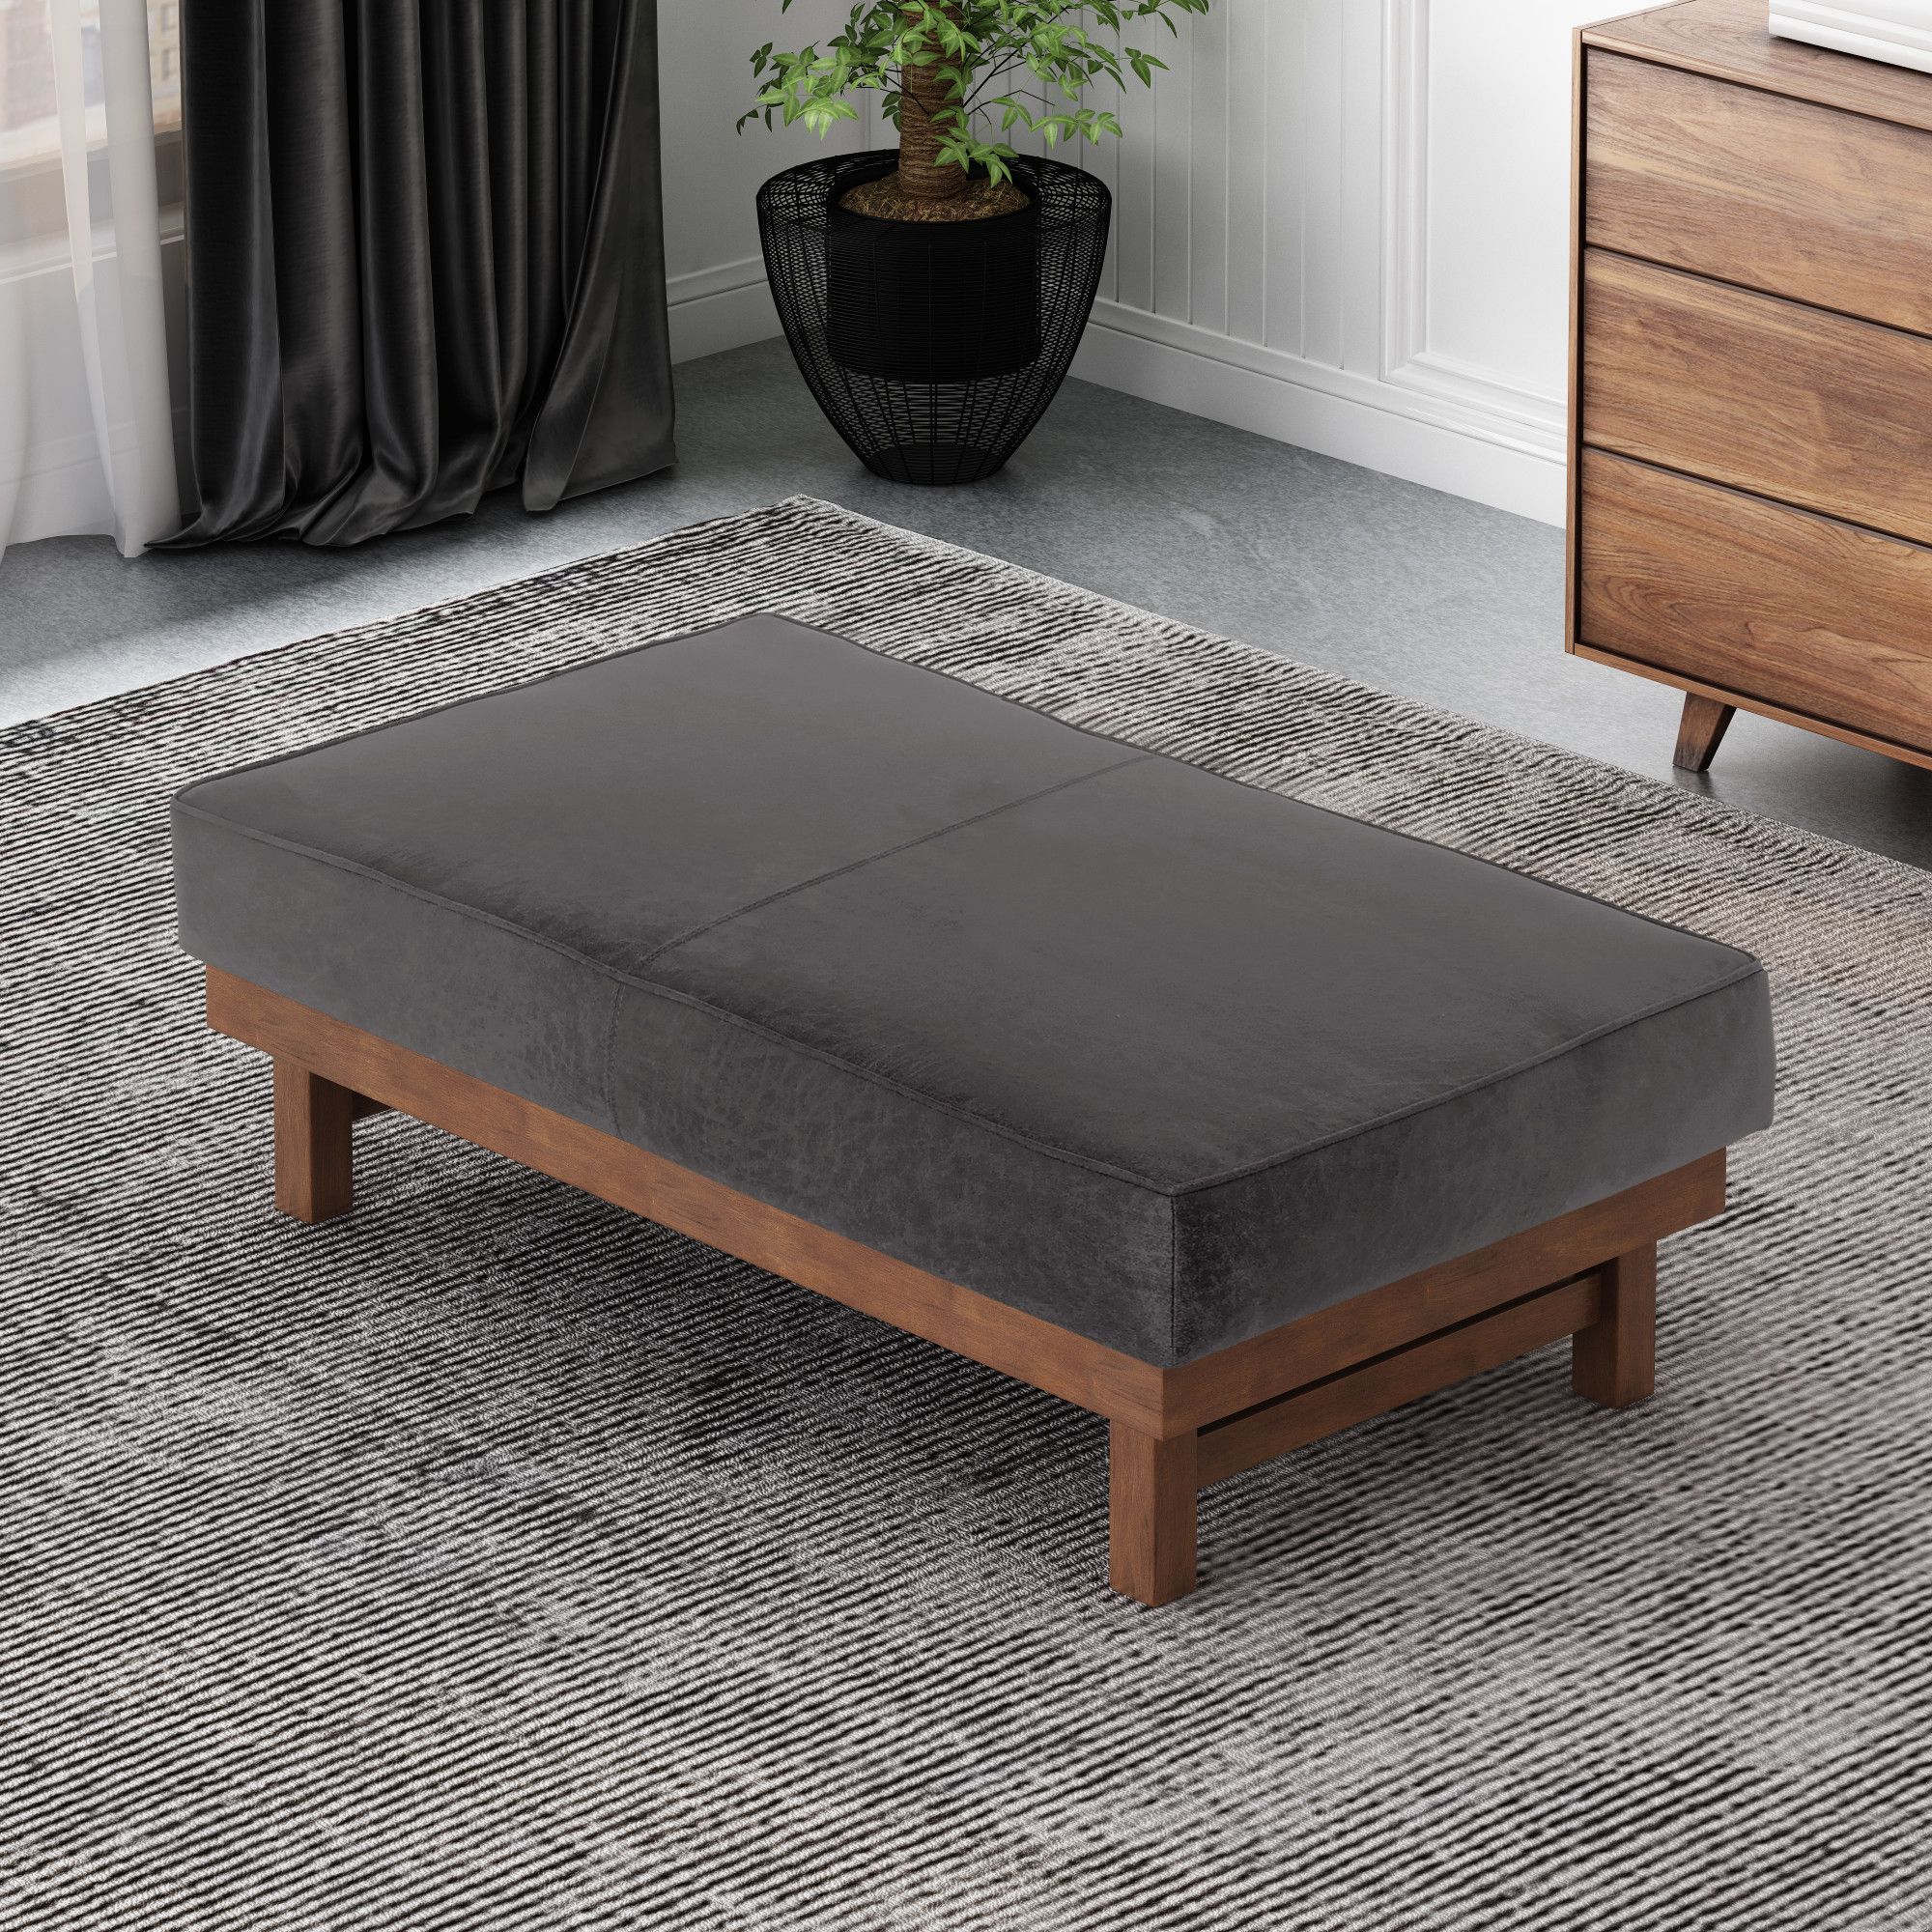 Hillman Modern Microfiber Cocktail Ottoman With Wood Frame, Slate And Walnut  In Slate/walnutnoble House Regarding Ottomans With Walnut Wooden Base (View 4 of 15)